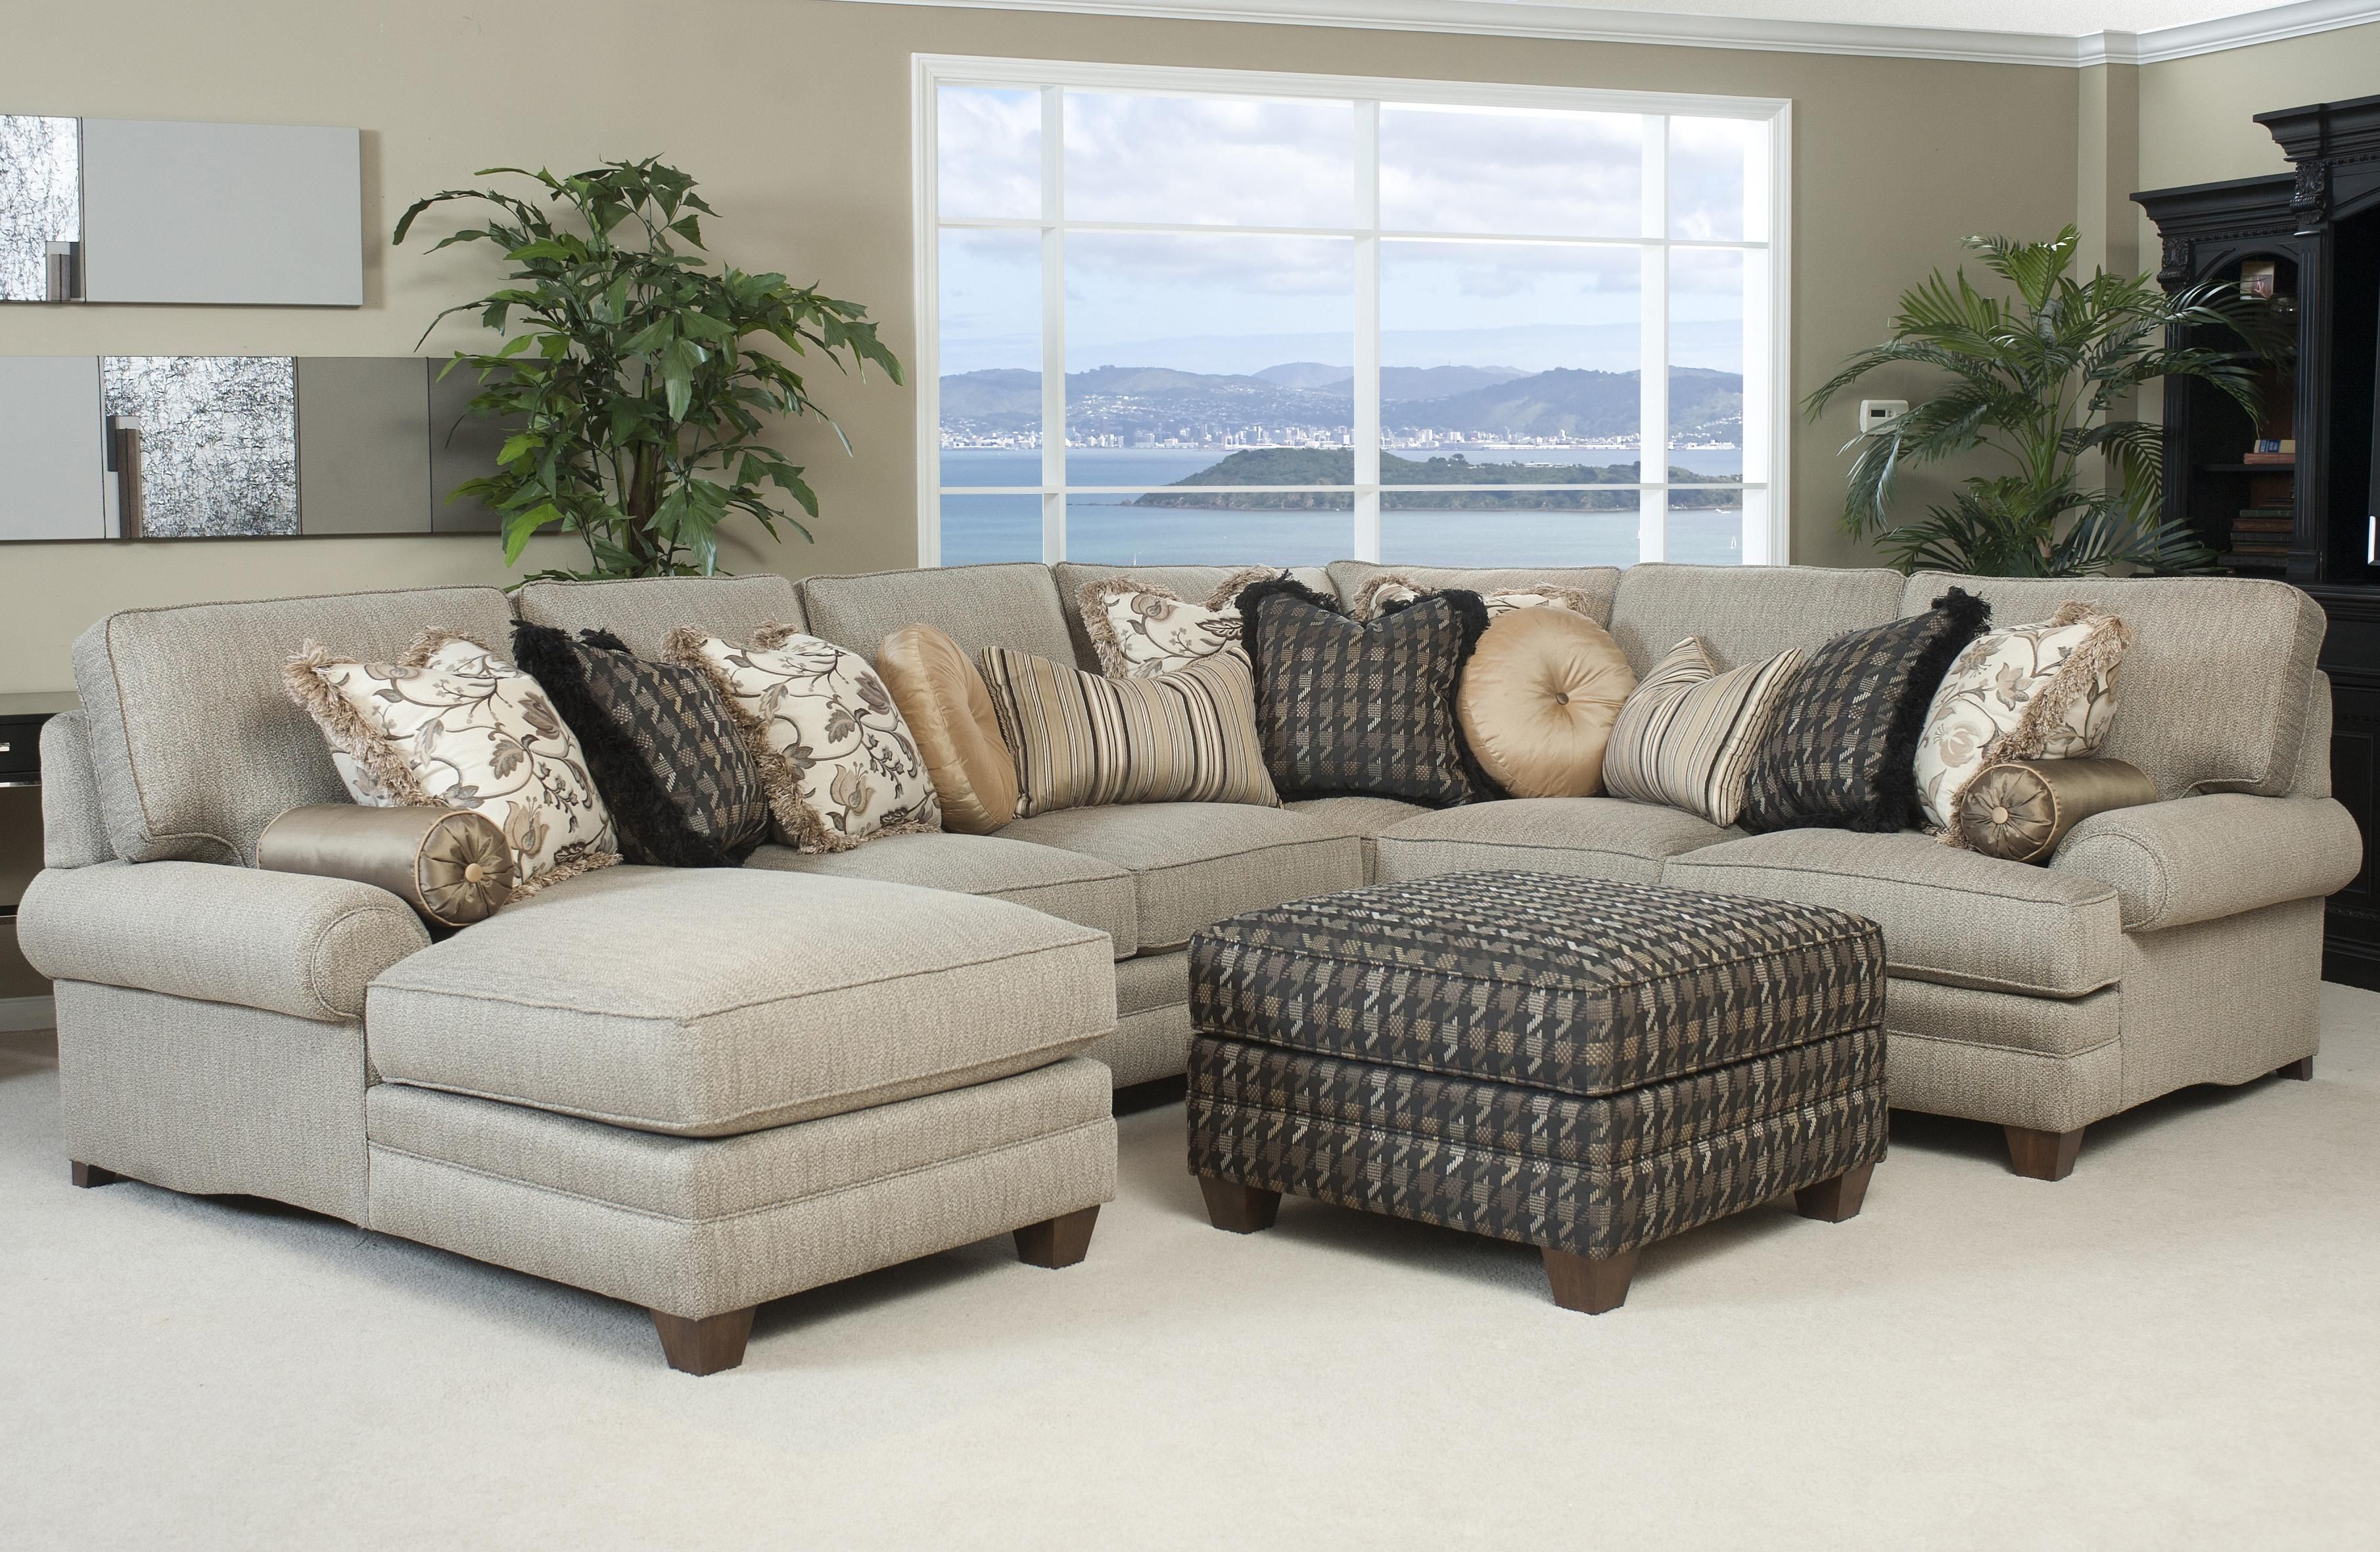 Most Comfortable Leather Sectional Sofa • Leather Sofa Throughout Comfortable Sectional Sofas (View 4 of 10)